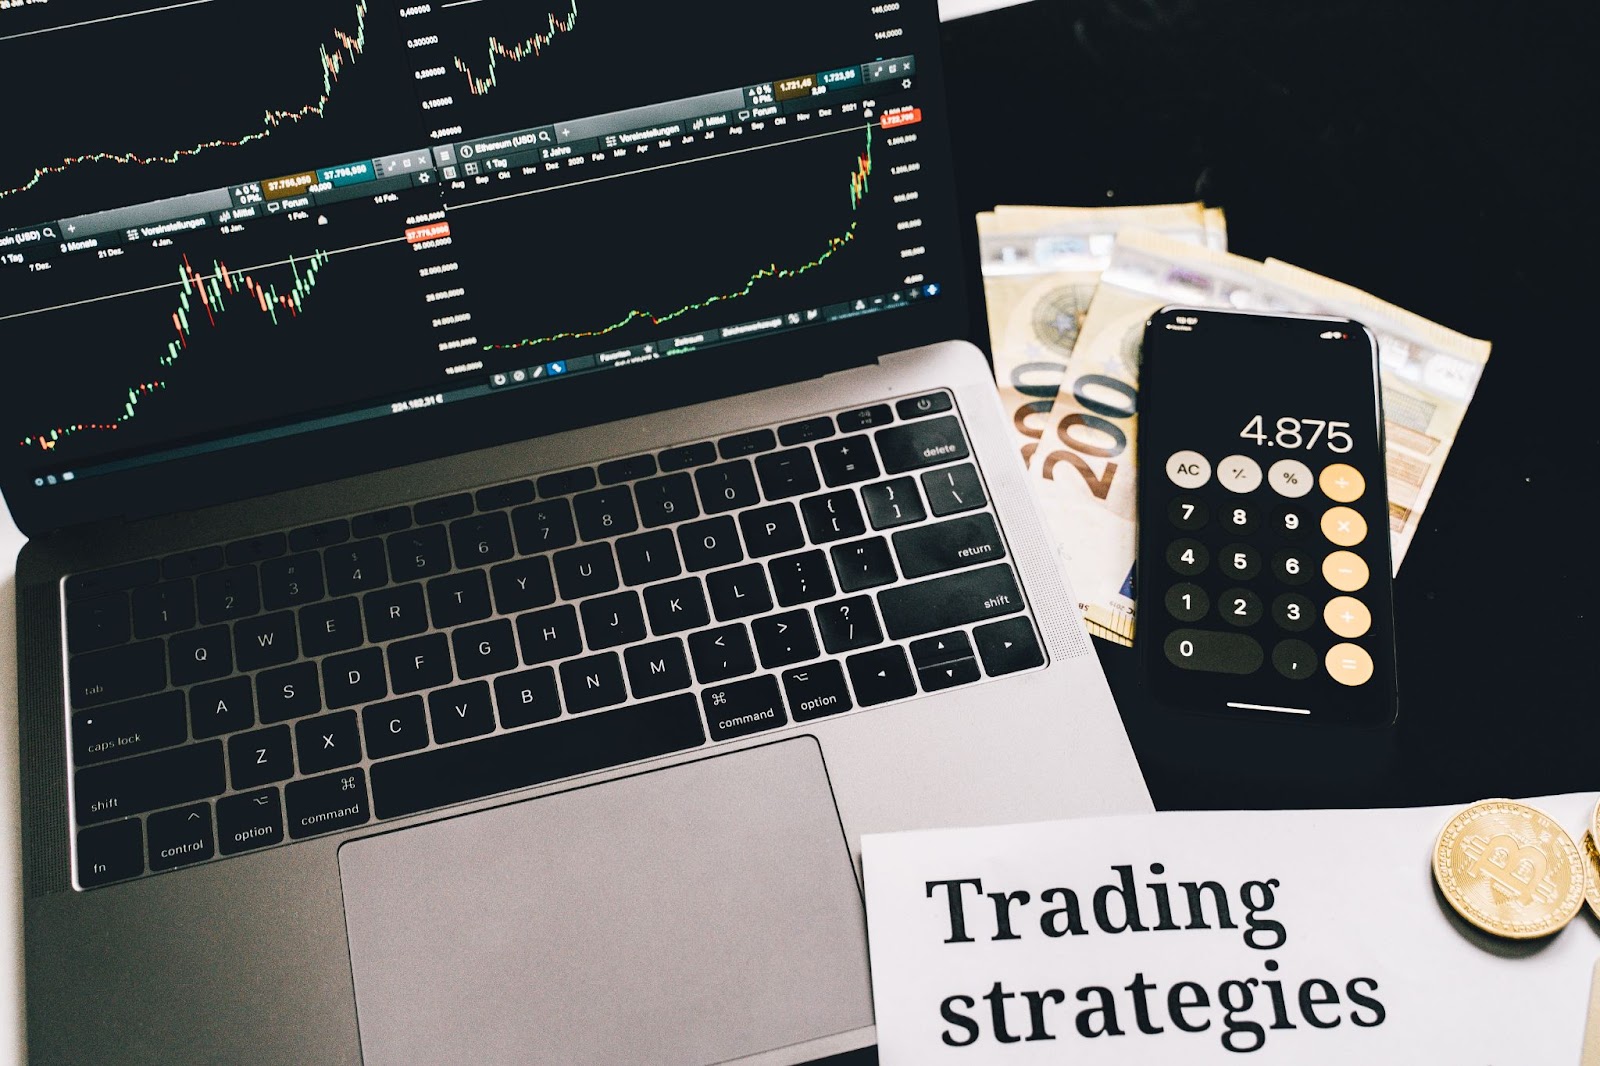 Stock charts on a laptop, calculator on a phone, and a trading strategies paper